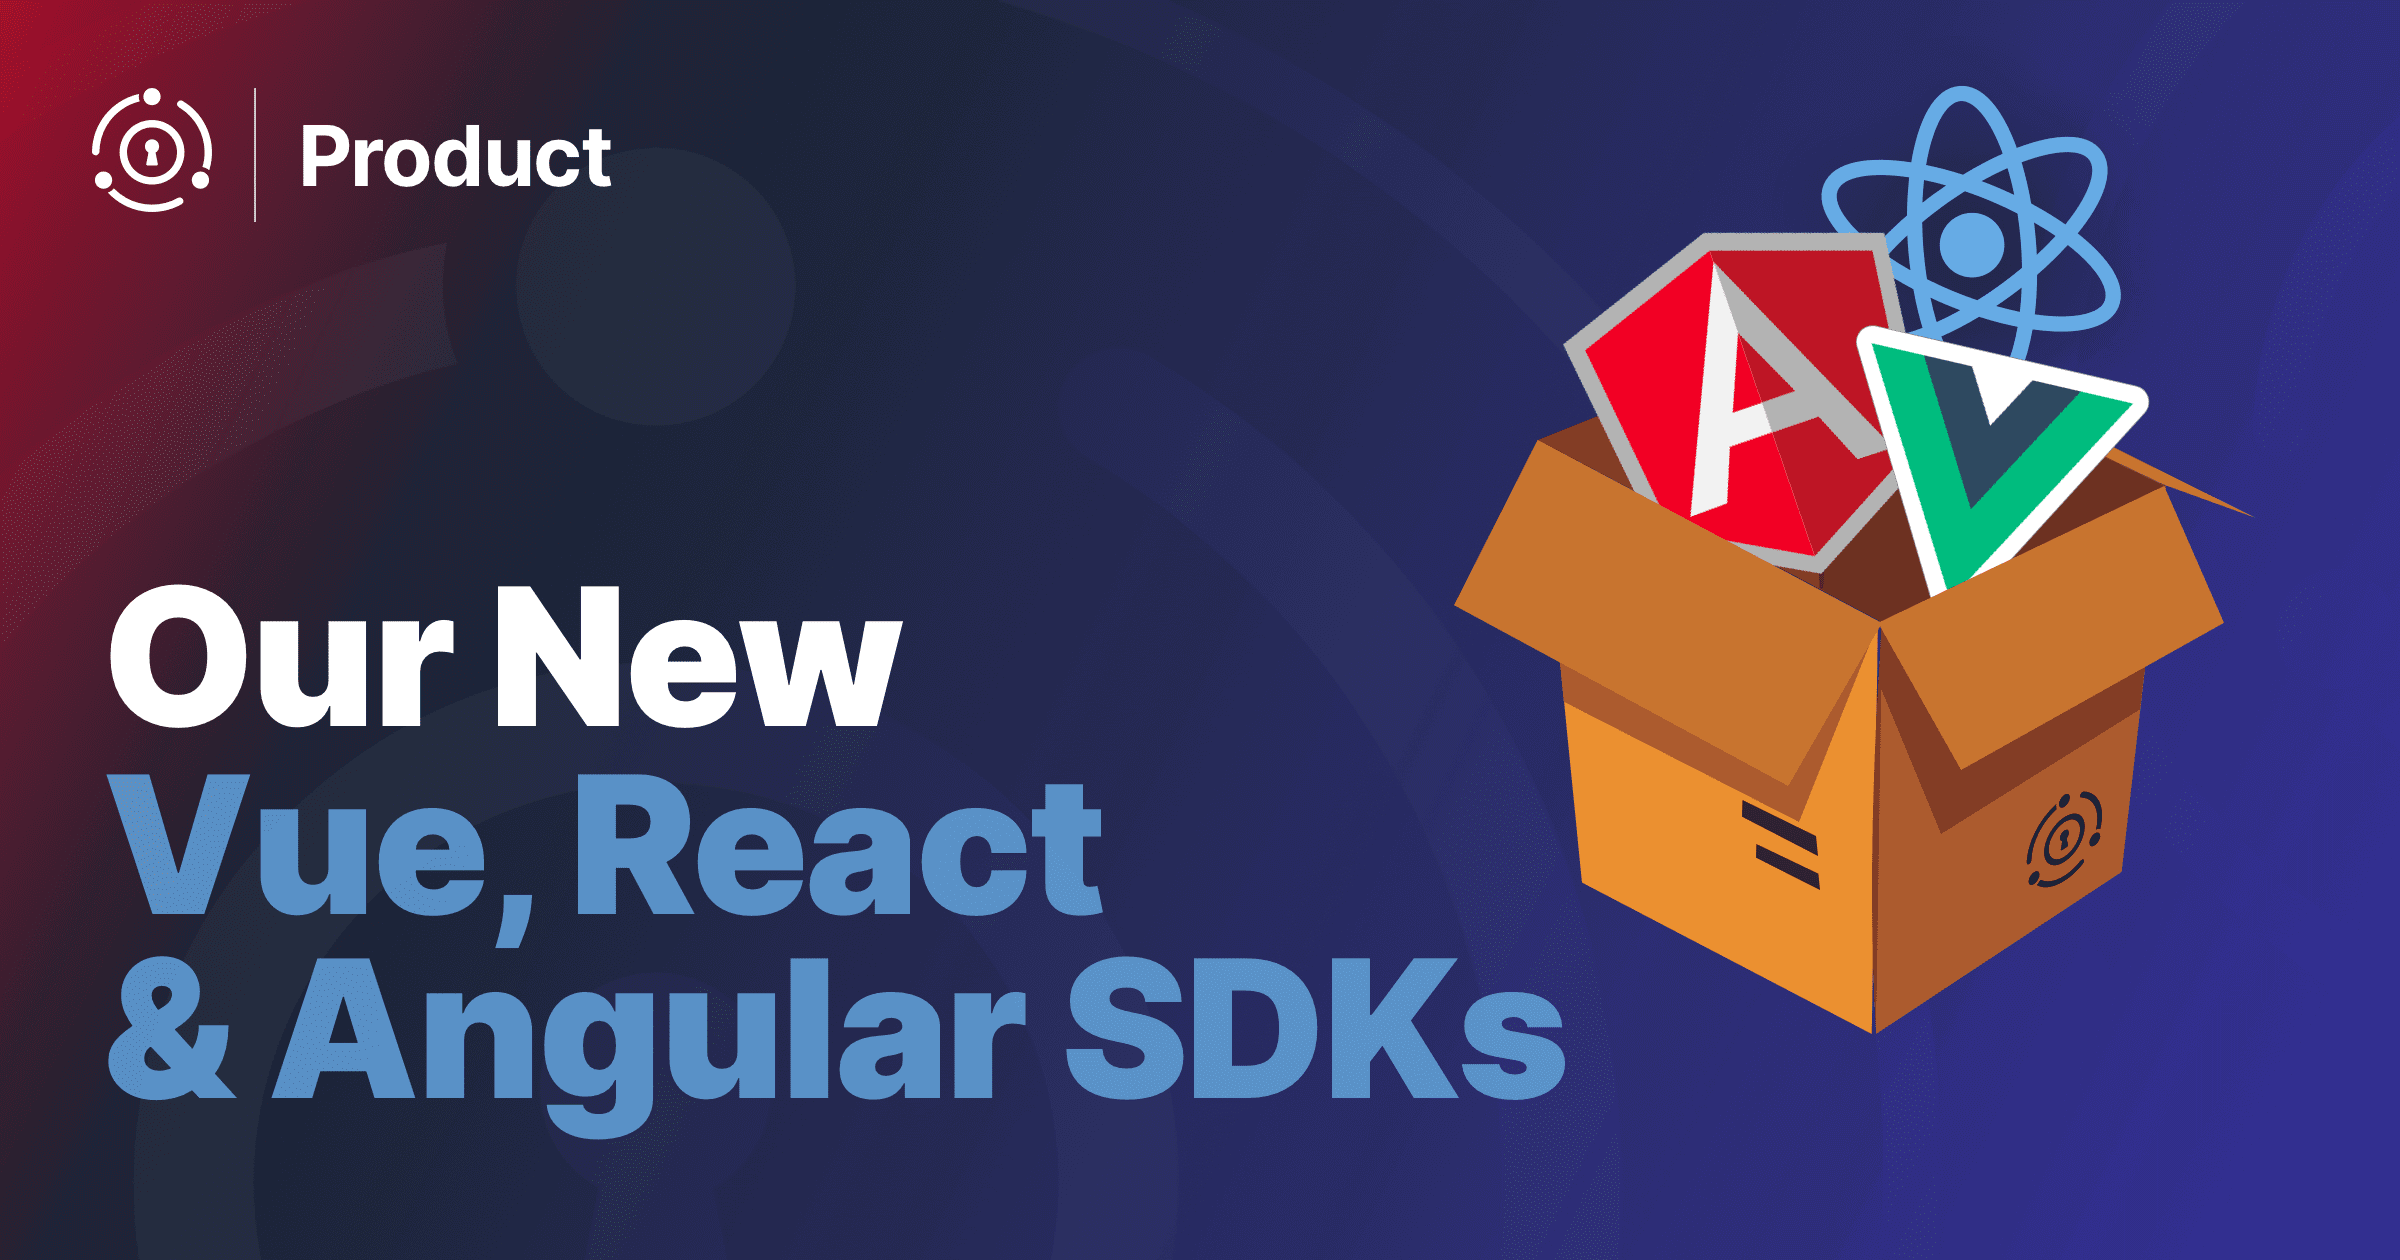 Our New Vue, React and Angular SDKs